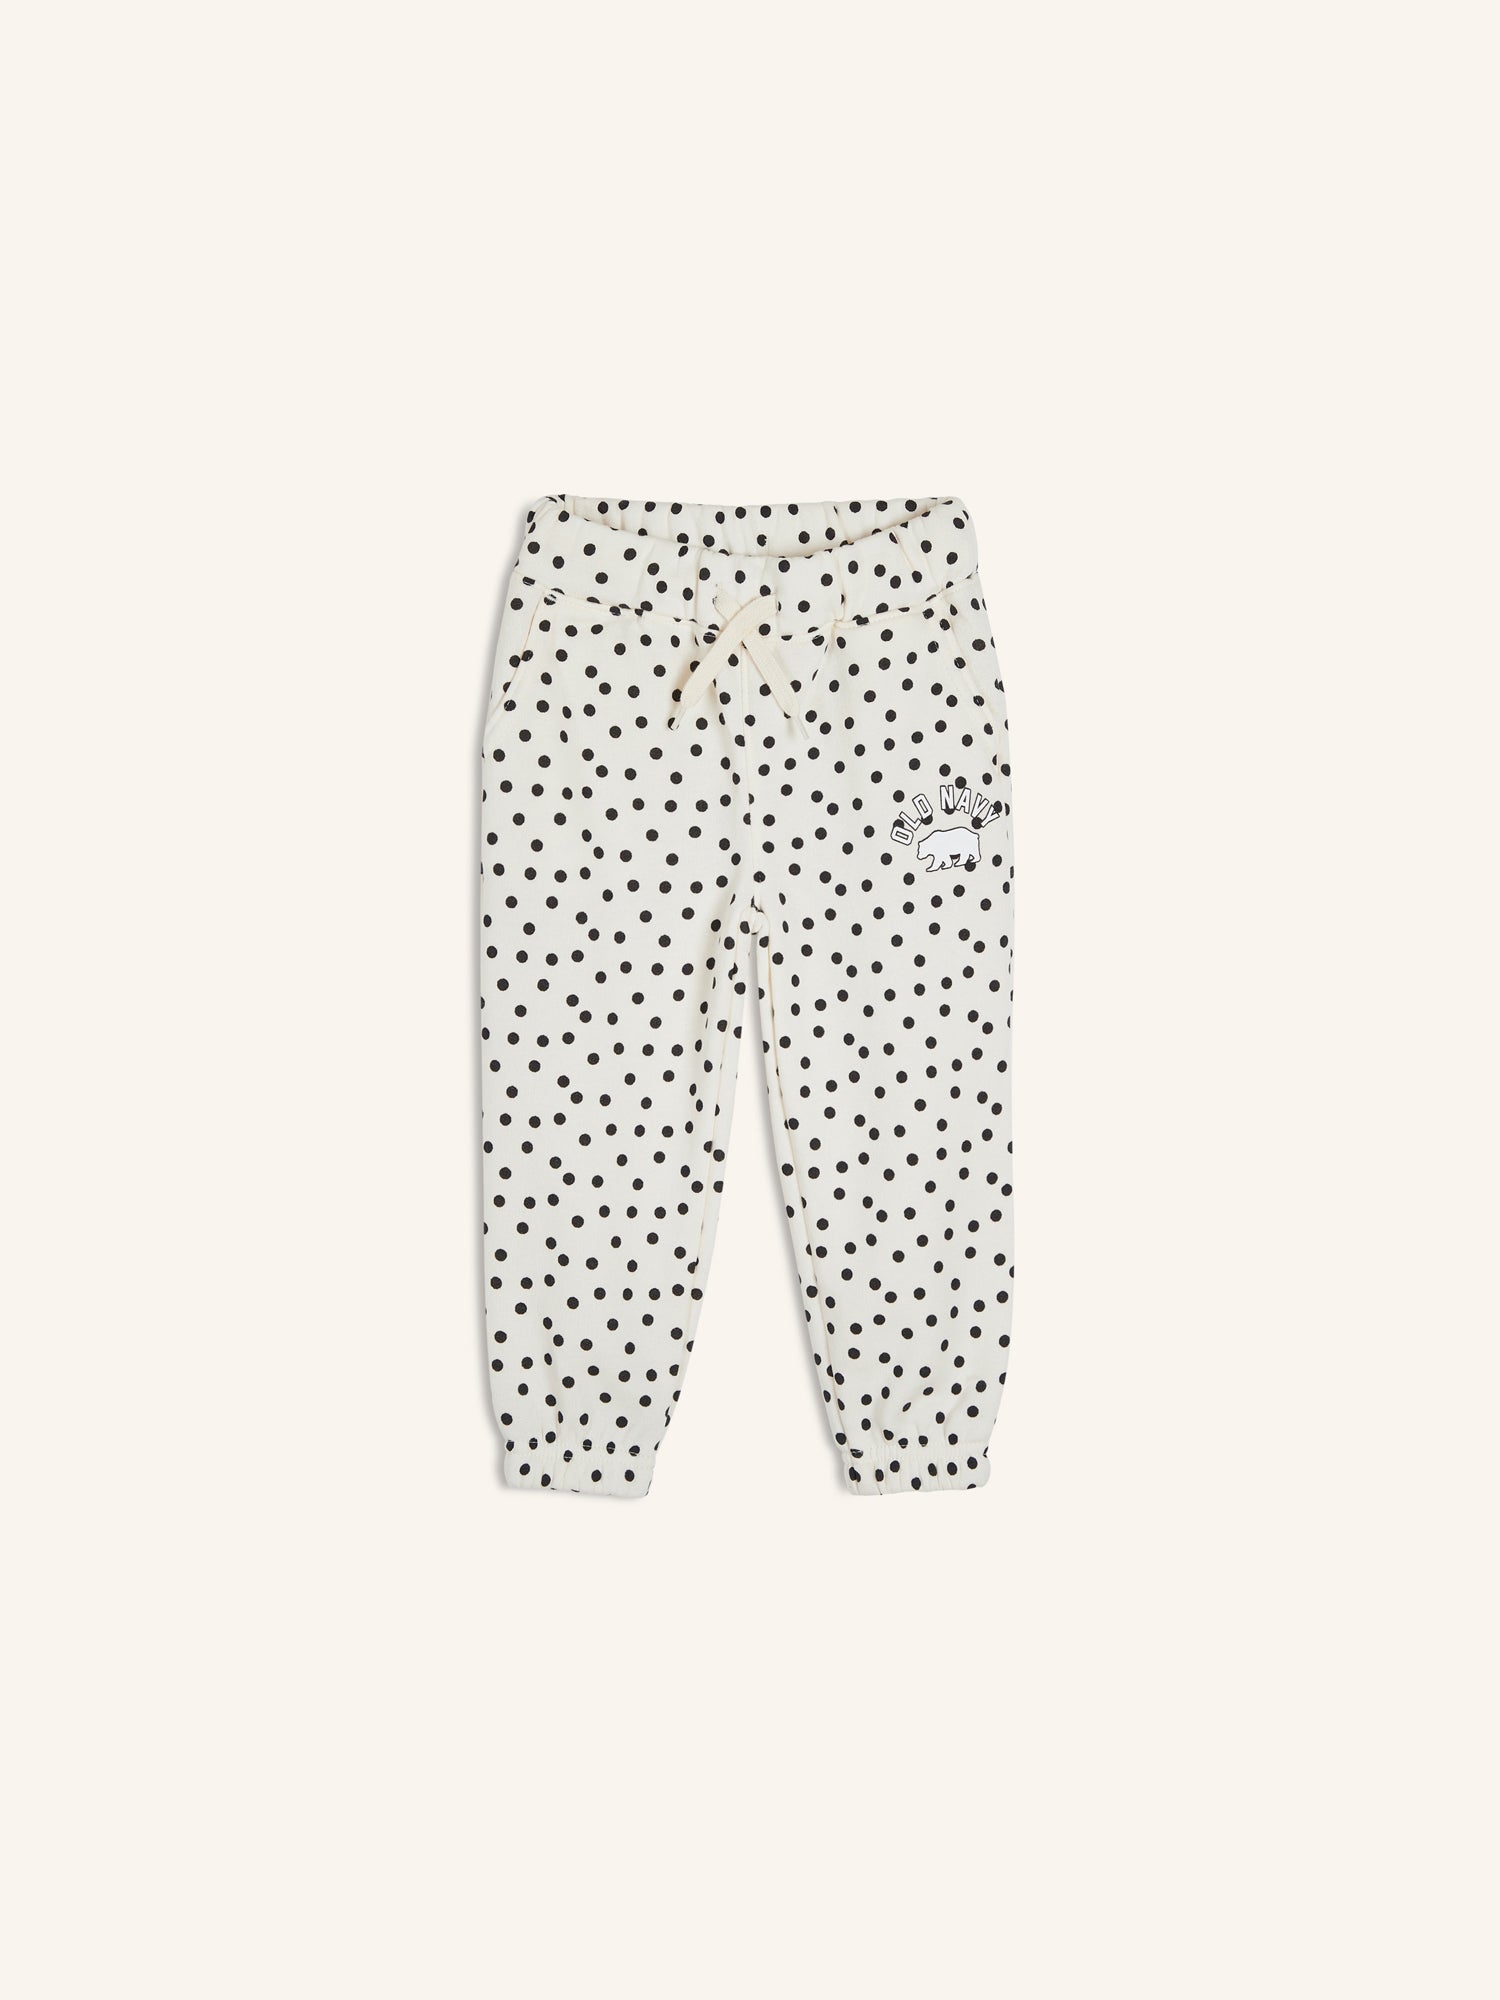 Toddler Boys Pants - Old Navy Philippines